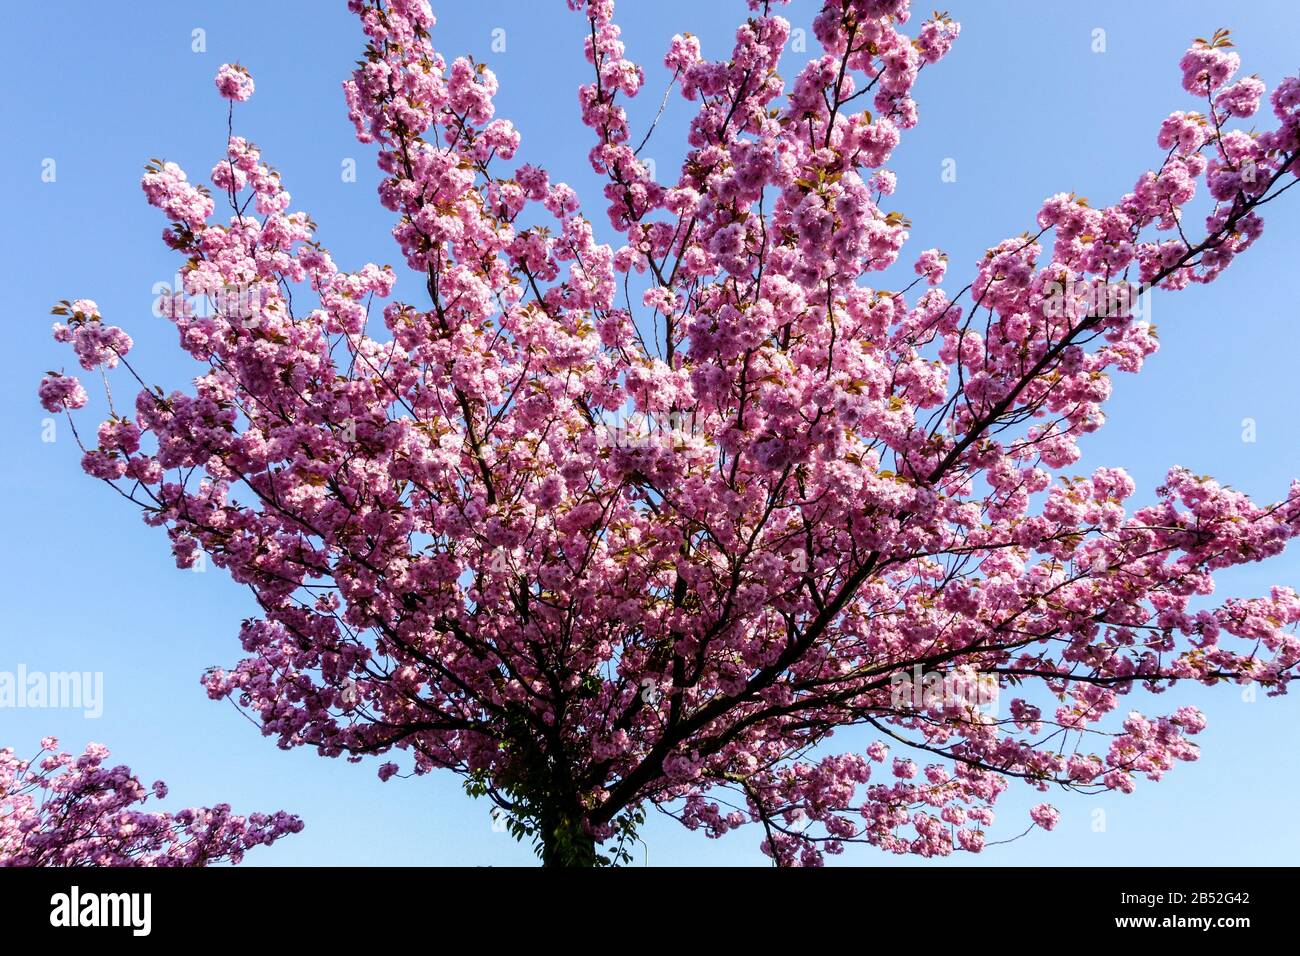 Spring tree in bloom pink Cherry tree blossoms against blue sky Flowering tree Spring flowering cherry tree Stock Photo